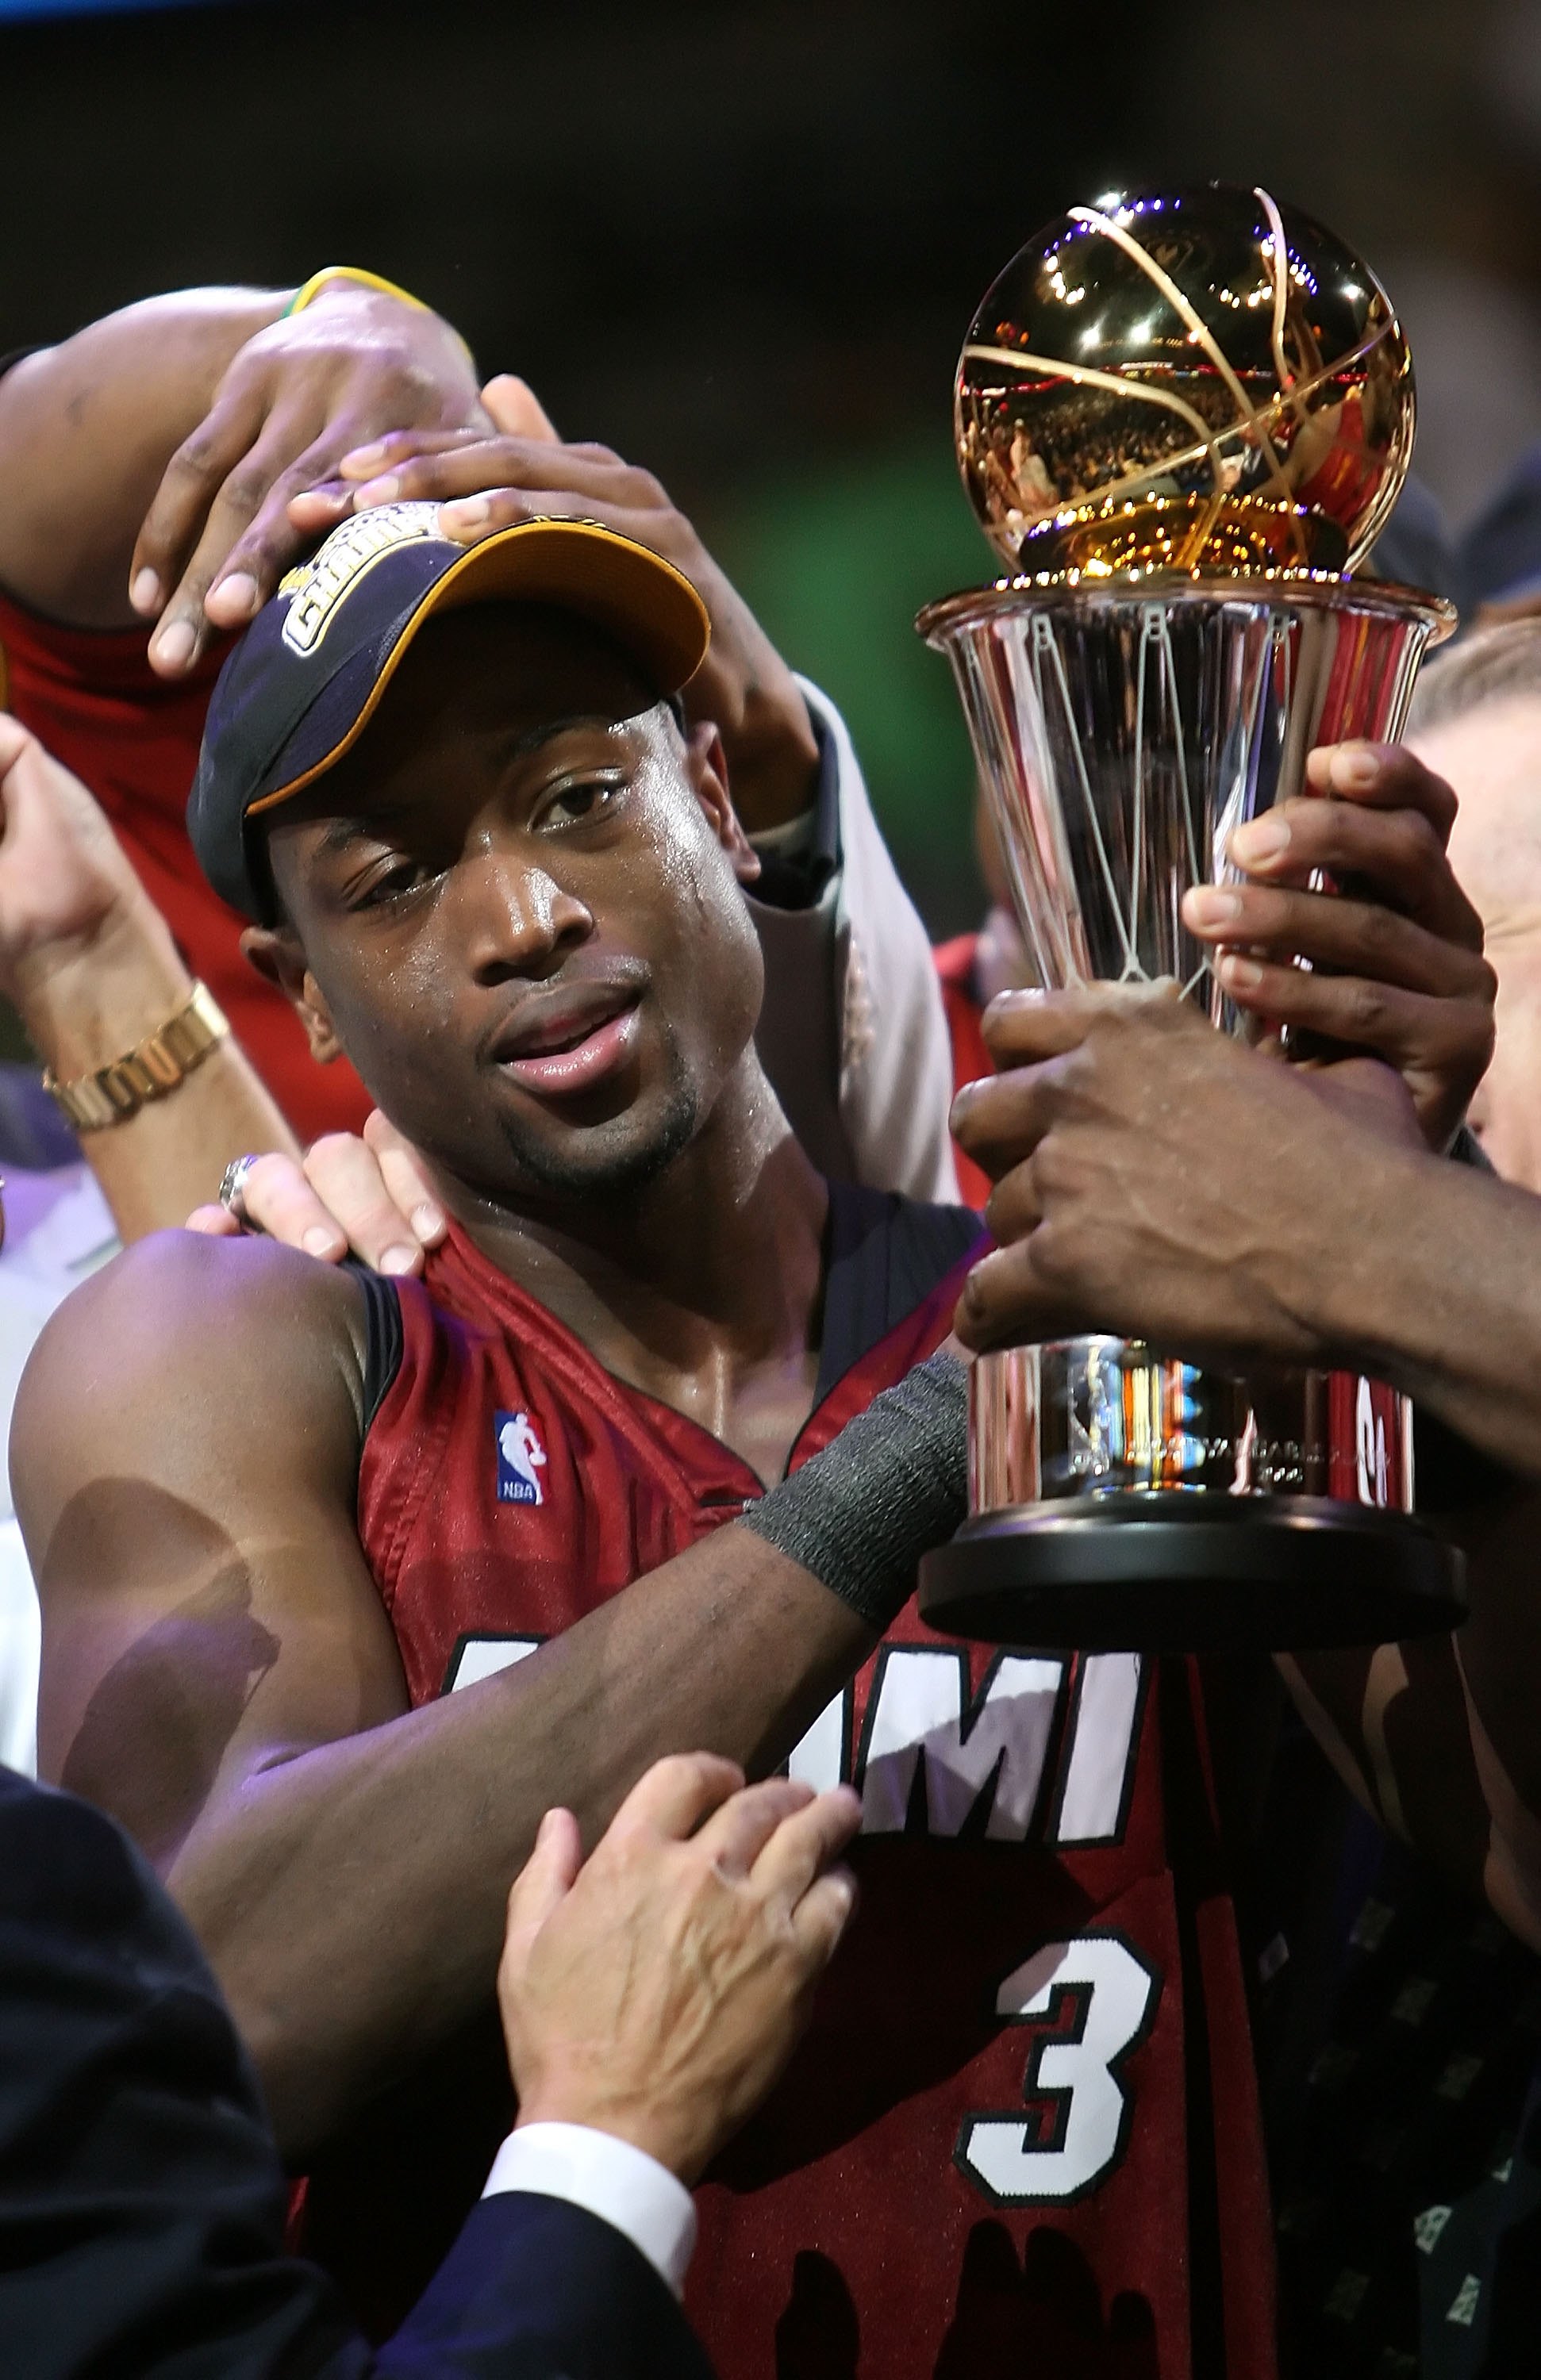 Kobe Bryant vs. Dwyane Wade A Comparison Between Two Featured